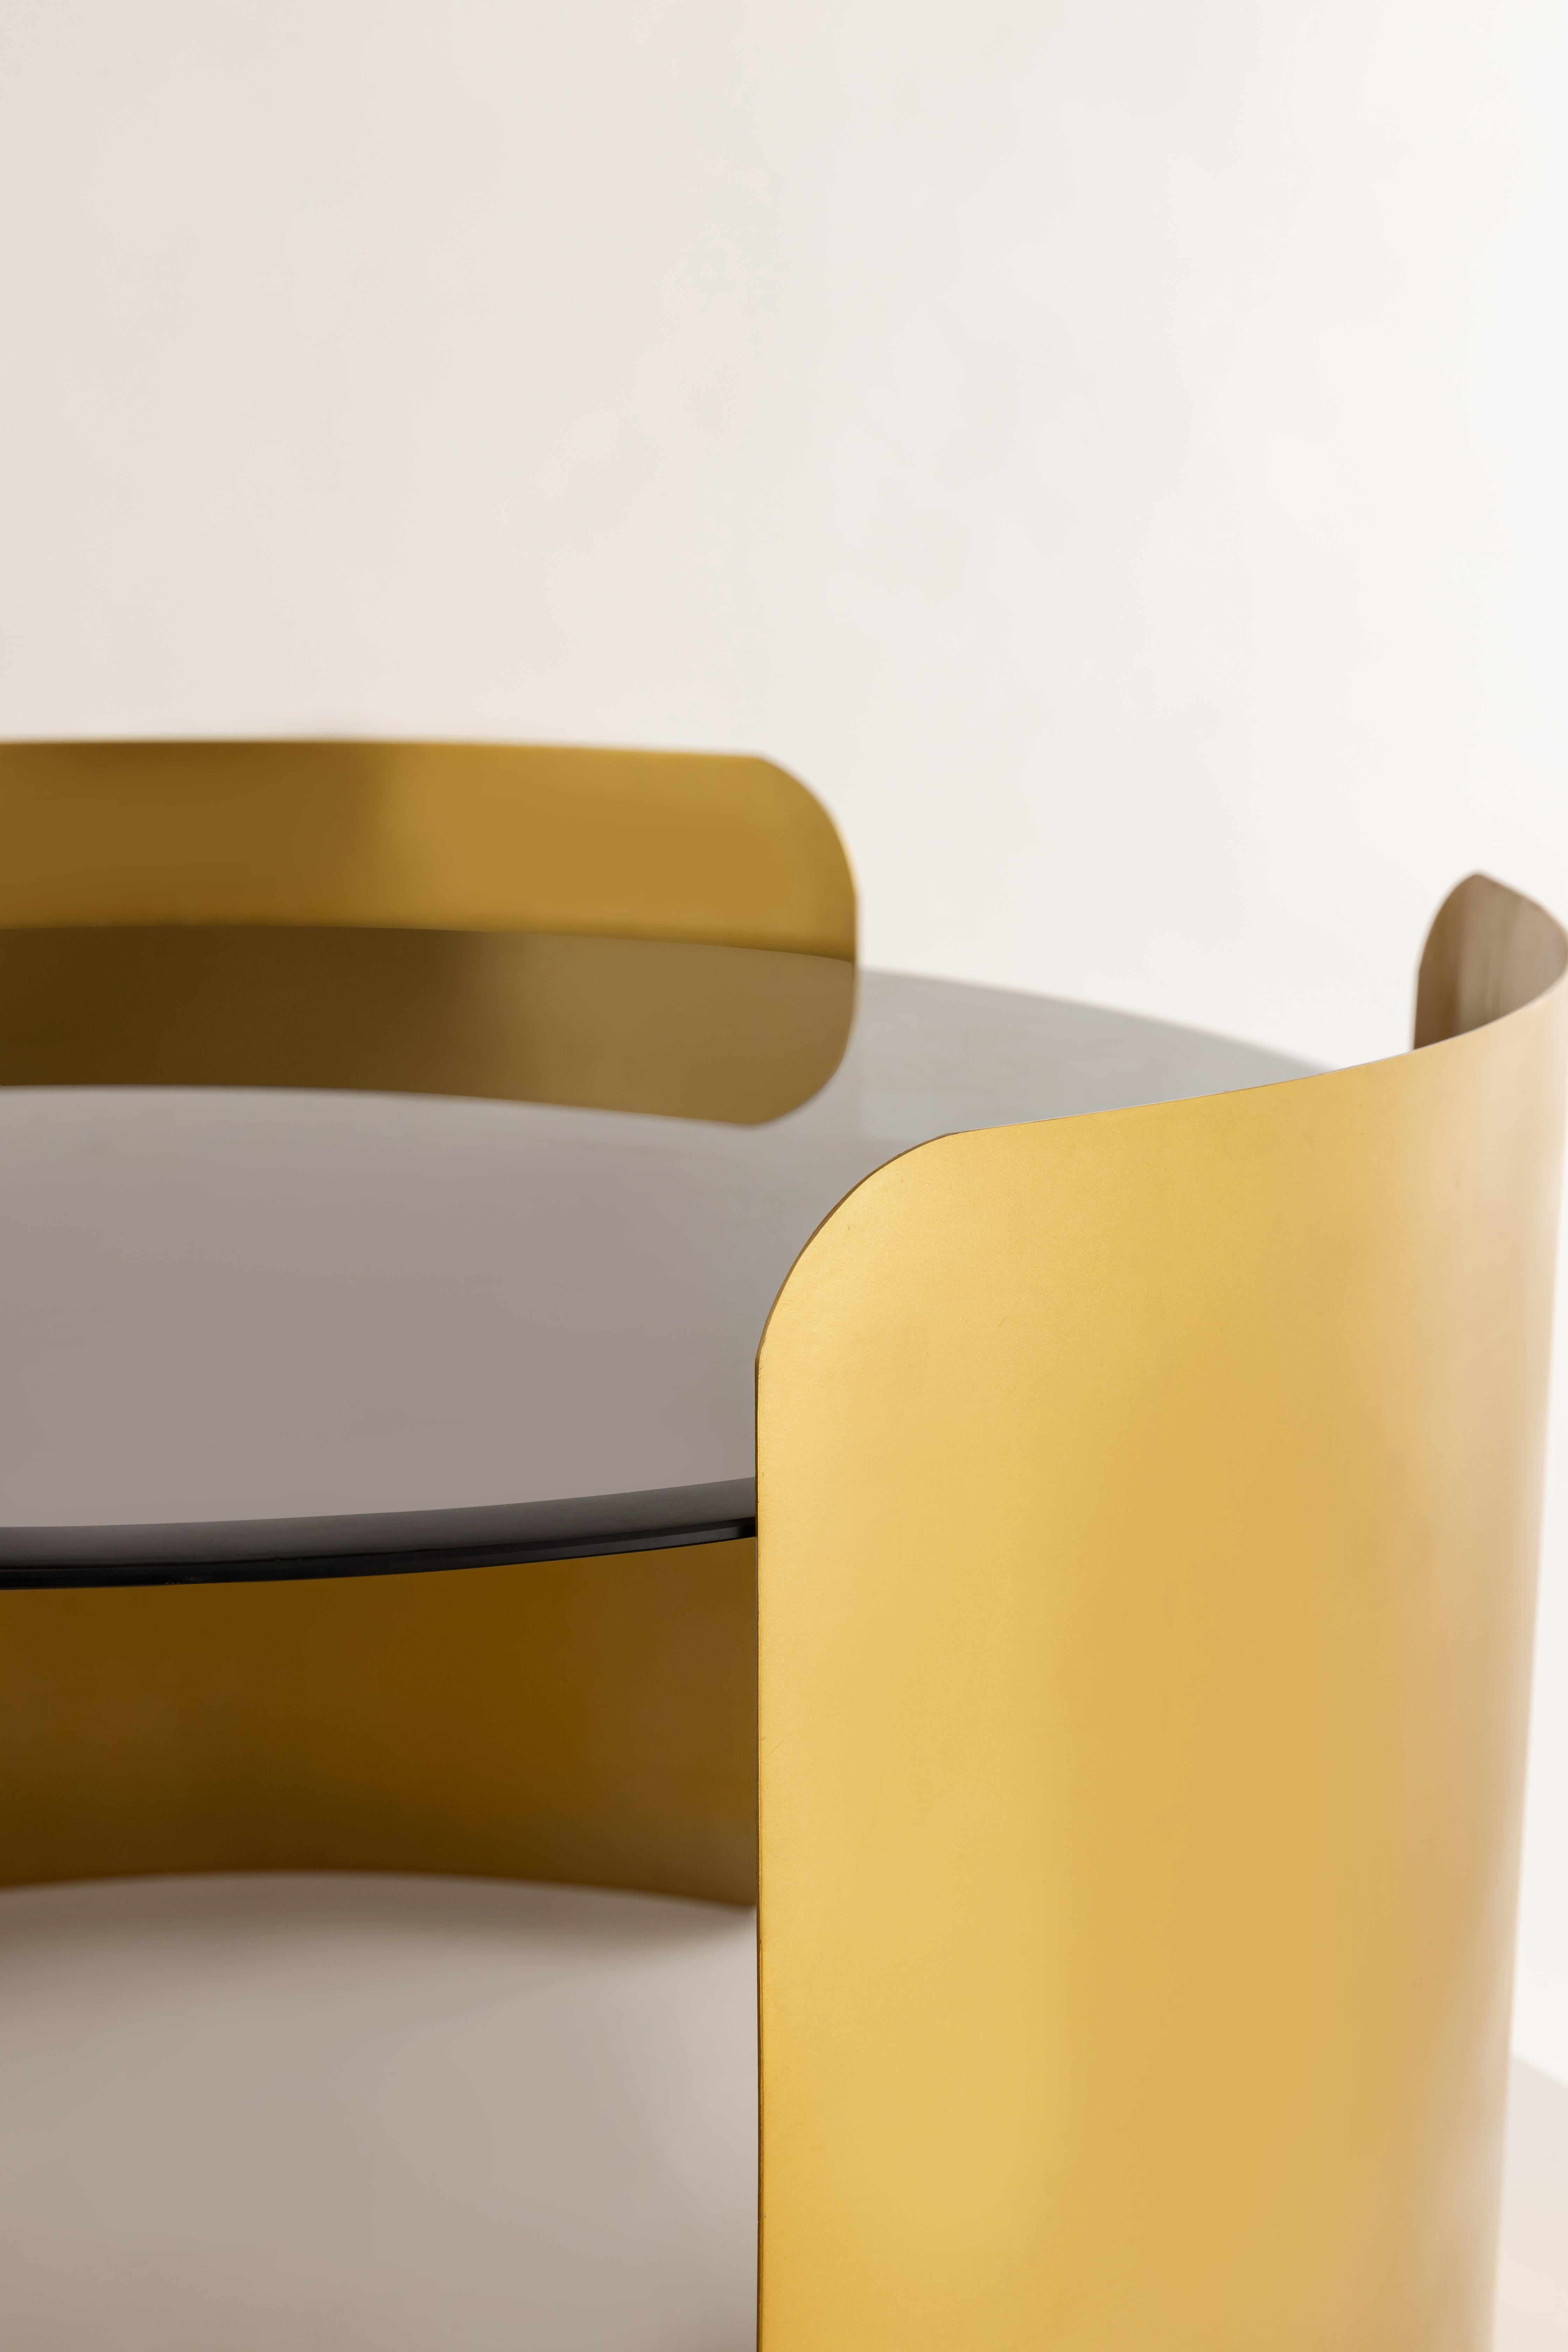 Your day just got cozier with the Hug Coffee Table. Finely crafted without a single harsh edge, this table is an embodiment of affection and elegance.

The circular top is gracefully enveloped by three metal sheets, curving around it like a loving